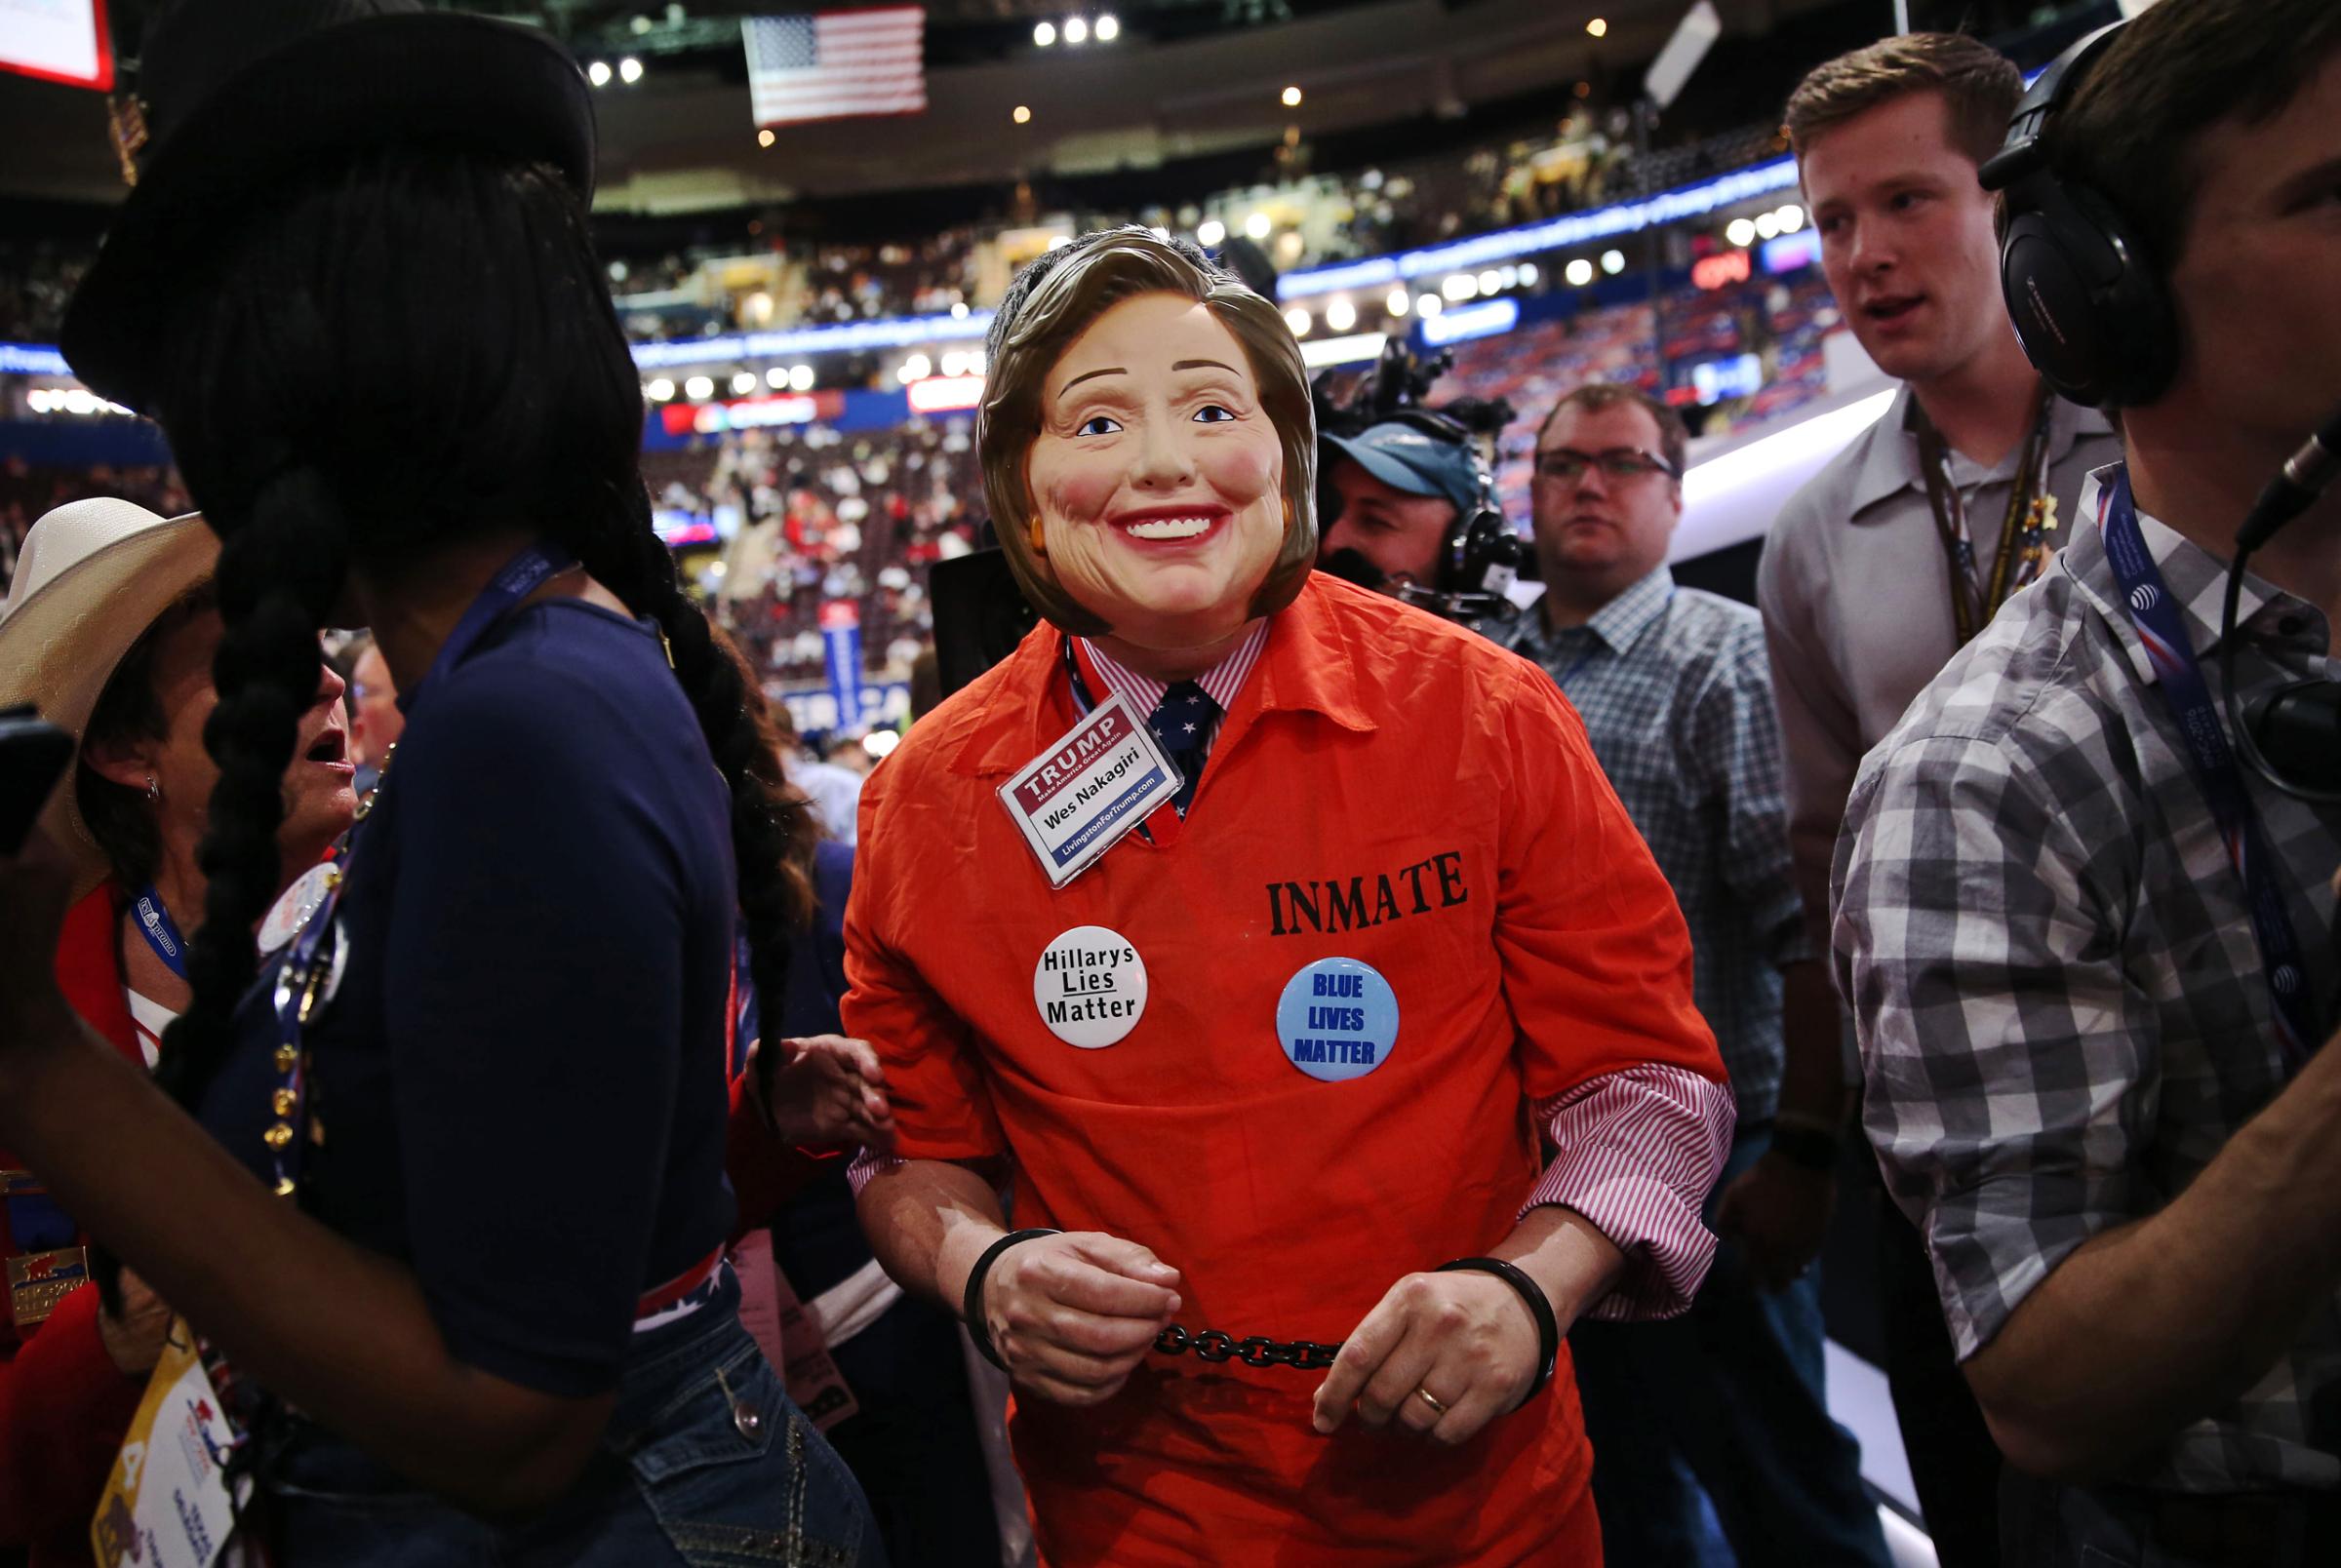 An attendee wears an inmate costume and mask in the likeness of Hillary Clinton during the Republican National Convention (RNC) in Cleveland, Ohio, on July 21, 2016.